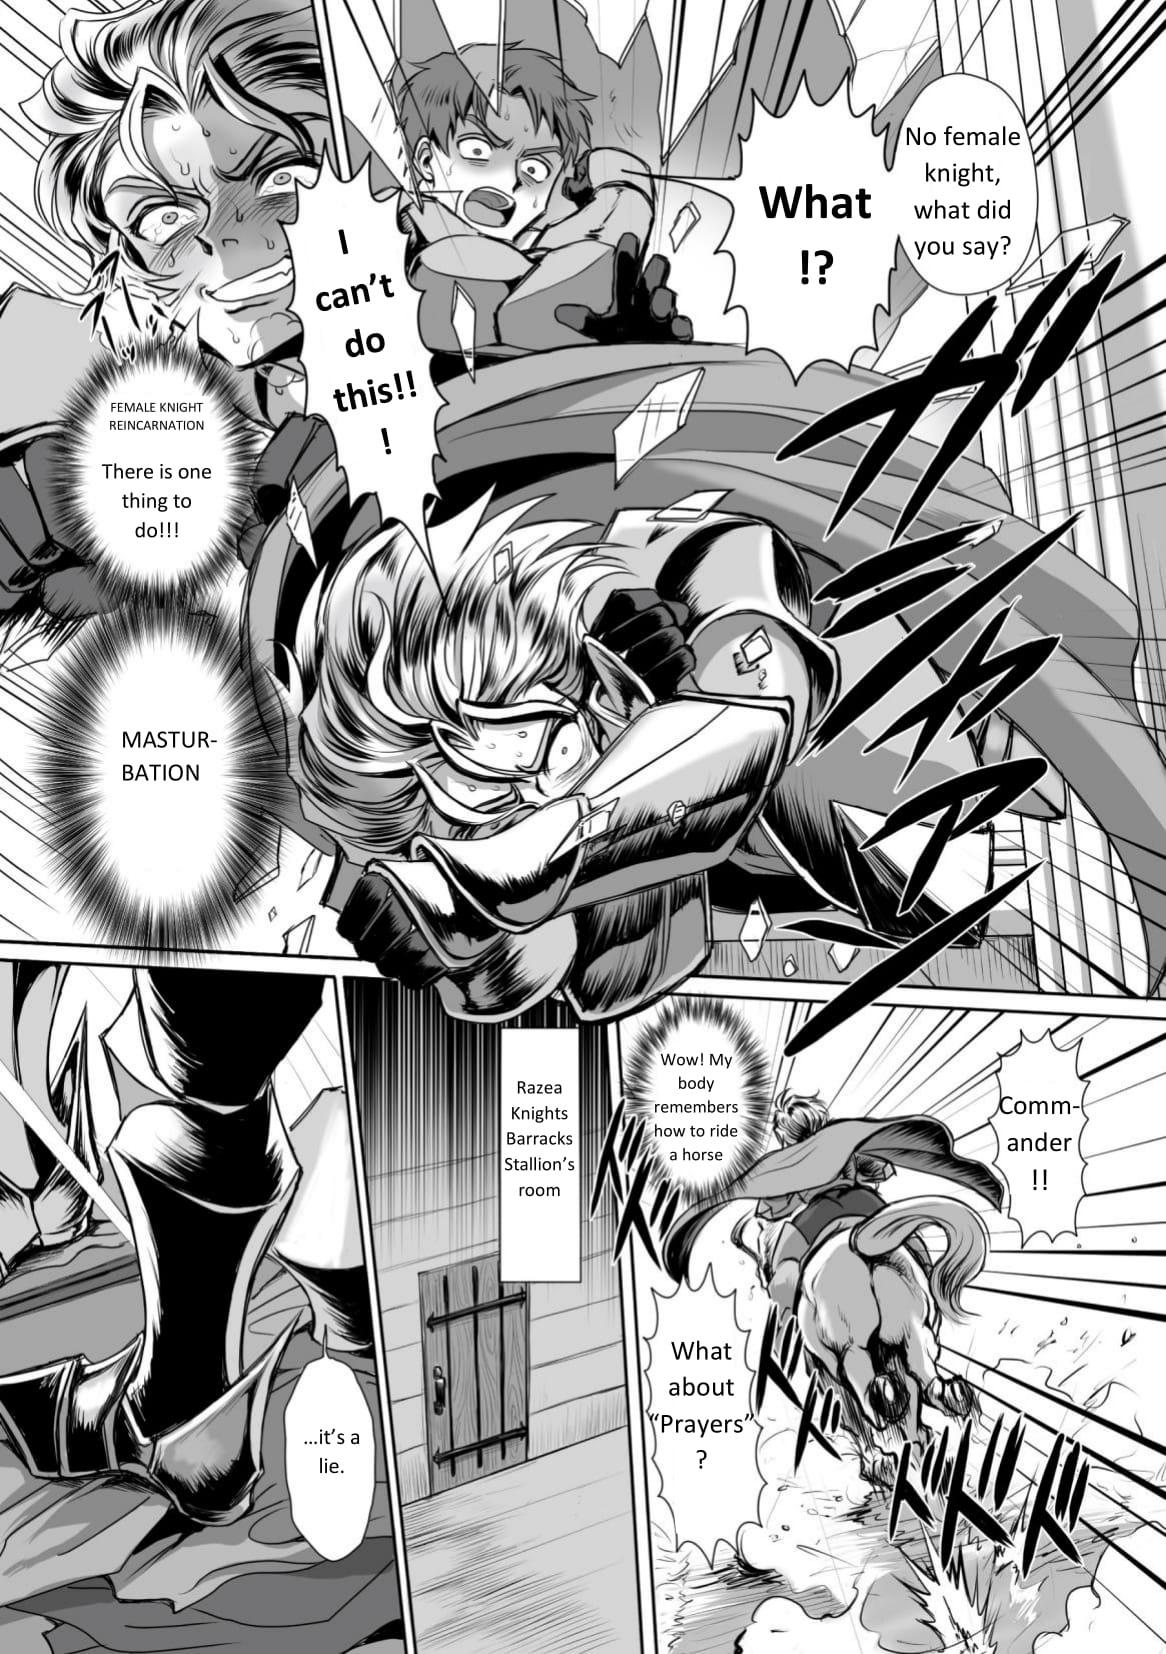 Slim [Usuno Taro] Possessed Knight Stallion-Taken Over By Disgusting Man Raped and Climaxes Unsightly - English Porno 18 - Page 7